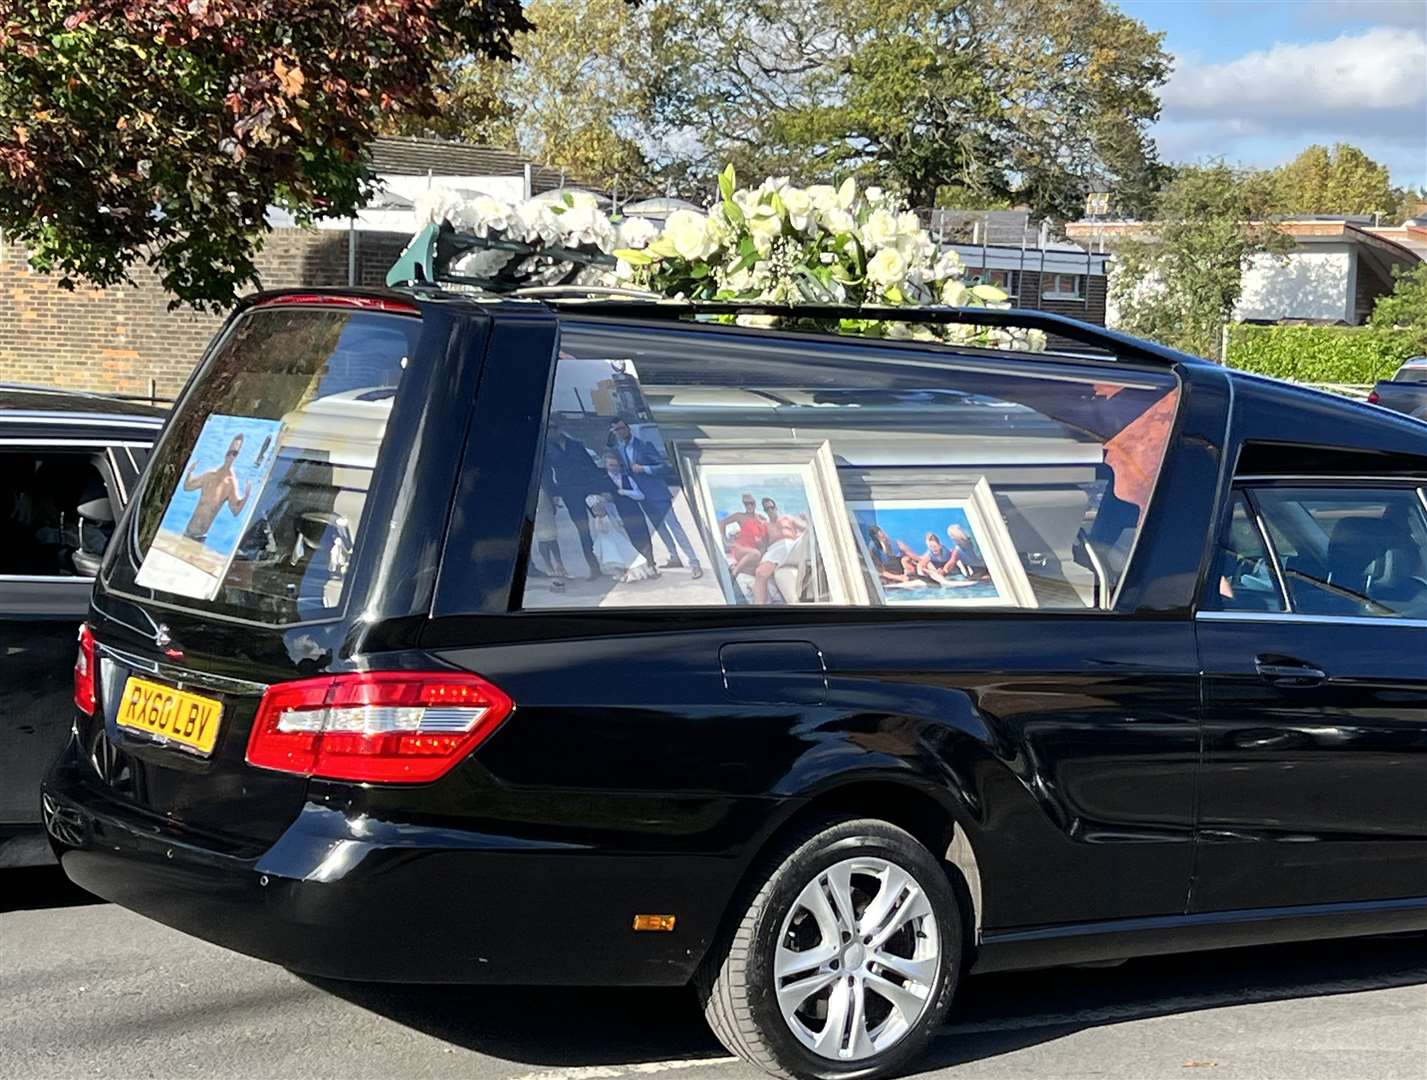 Flowers were left on top of one of the hearses. Picture: Barry Goodwin